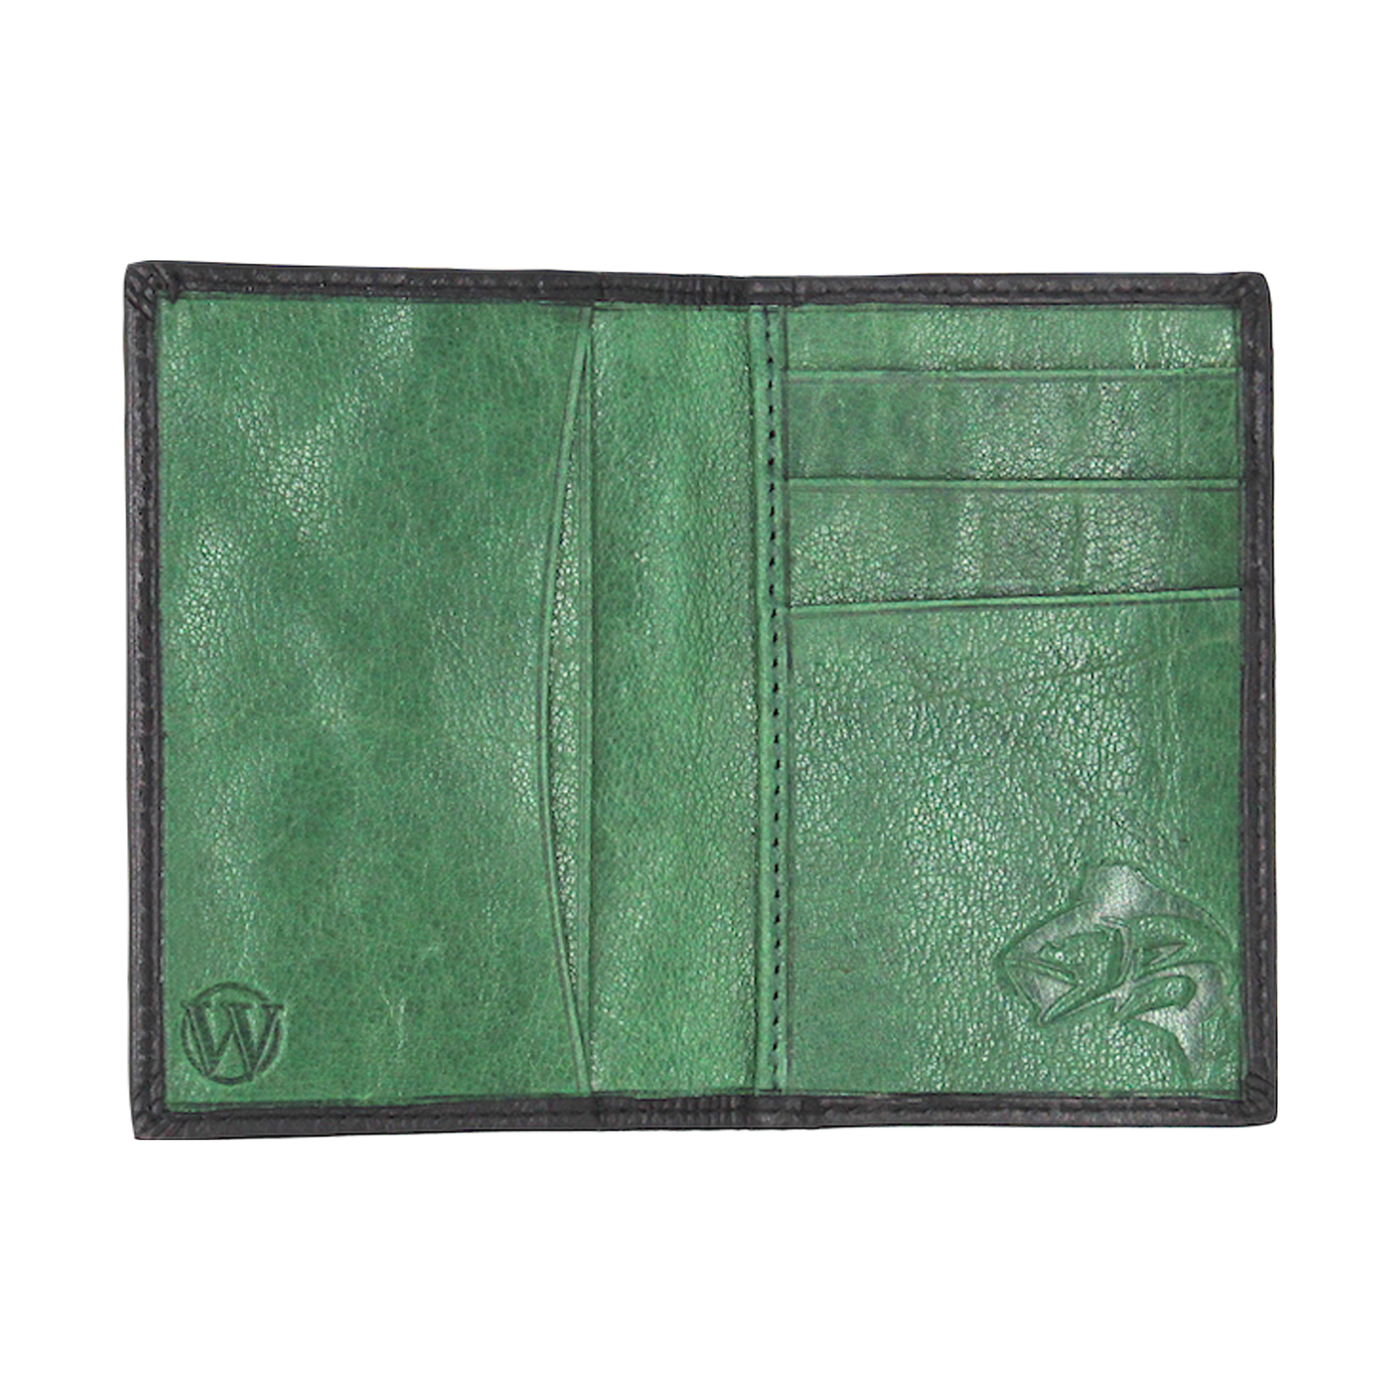 Our Pursuit Front Pocket Duo-Fold Bass Wallet brings an element of class with its premier full grain leather and bold hand-dyed color in the inner panels. The debossed bass provides a personalized touch for any devoted angler. 4 Card Slots 2 Interior Pockets Exterior Easy Access Pocket Slim Minimalist & Modern Design Dimensions: 4.3"L x 3"H RFID Protection Color: Black | Moss